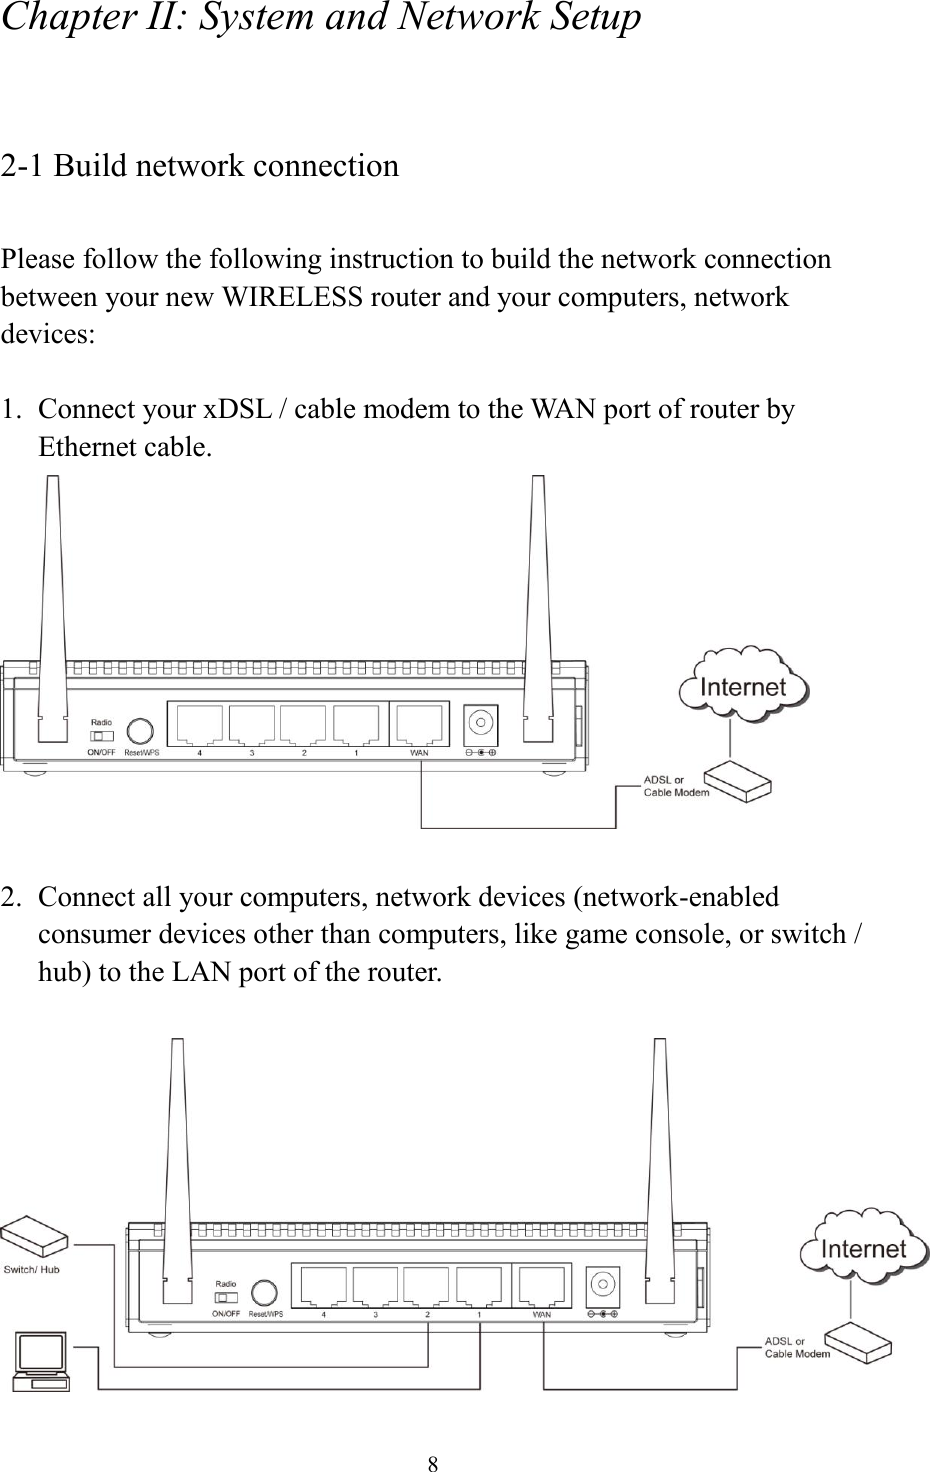 8 Chapter II: System and Network Setup  2-1 Build network connection  Please follow the following instruction to build the network connection between your new WIRELESS router and your computers, network devices:  1. Connect your xDSL / cable modem to the WAN port of router by Ethernet cable.     2. Connect all your computers, network devices (network-enabled consumer devices other than computers, like game console, or switch / hub) to the LAN port of the router.   